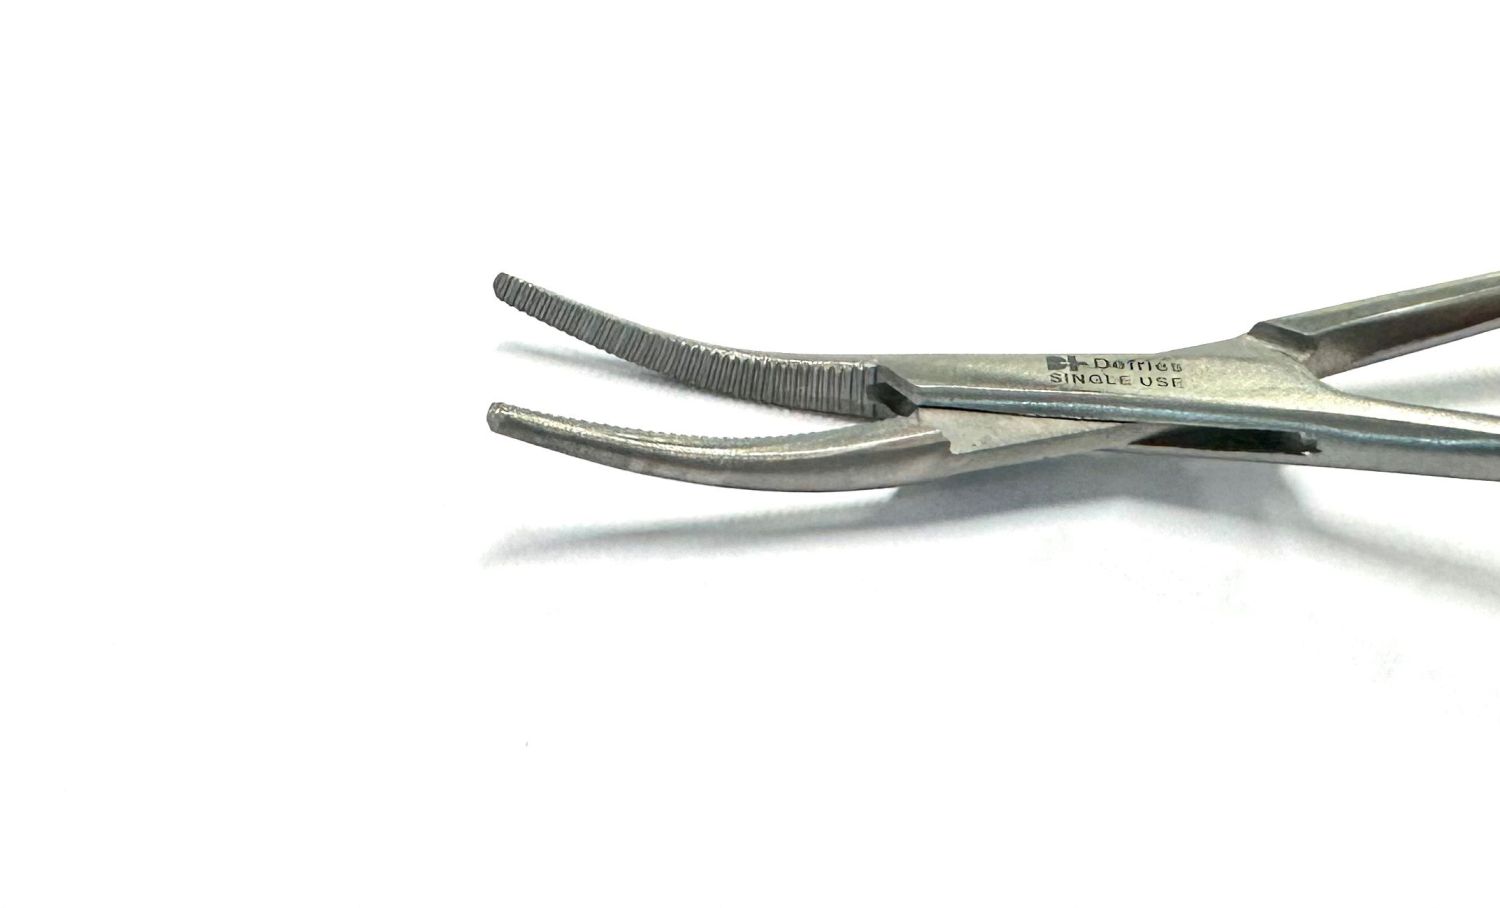 Mosquito forcep tip